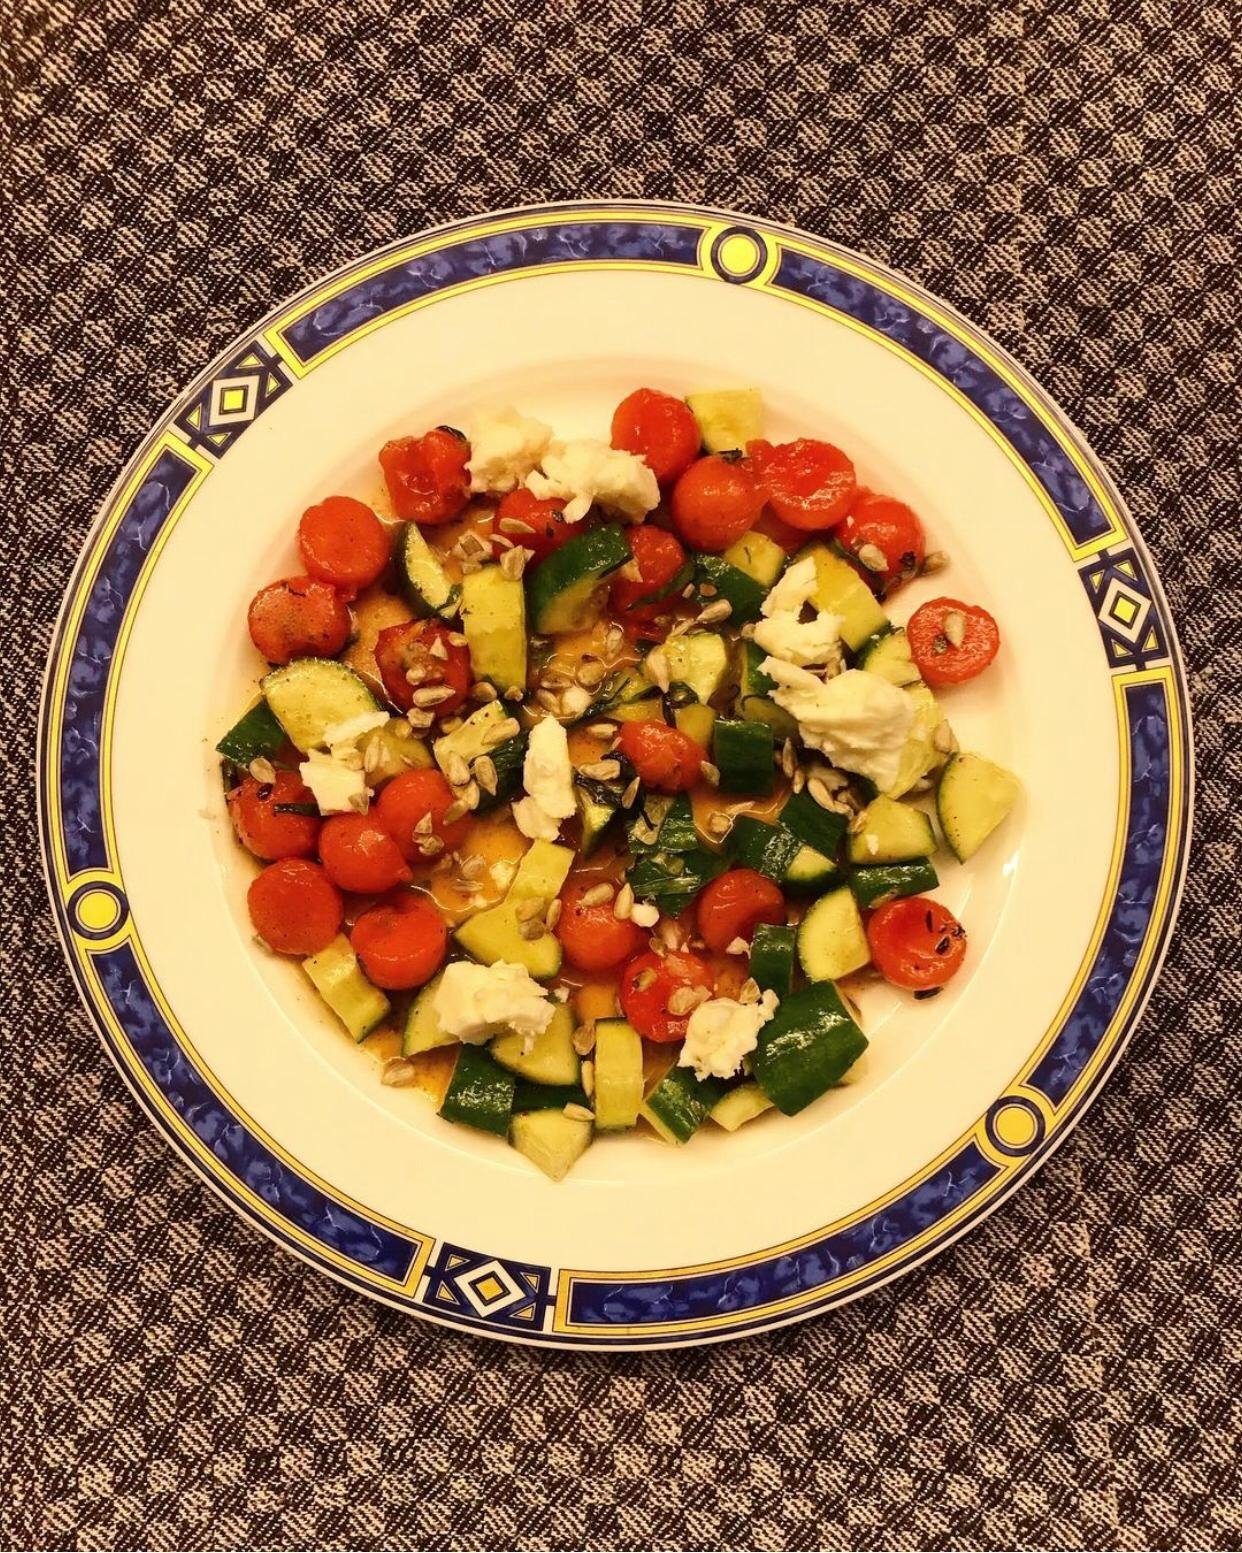 Salad with watermelon. (Photo from Instagram @mabou.pera) 